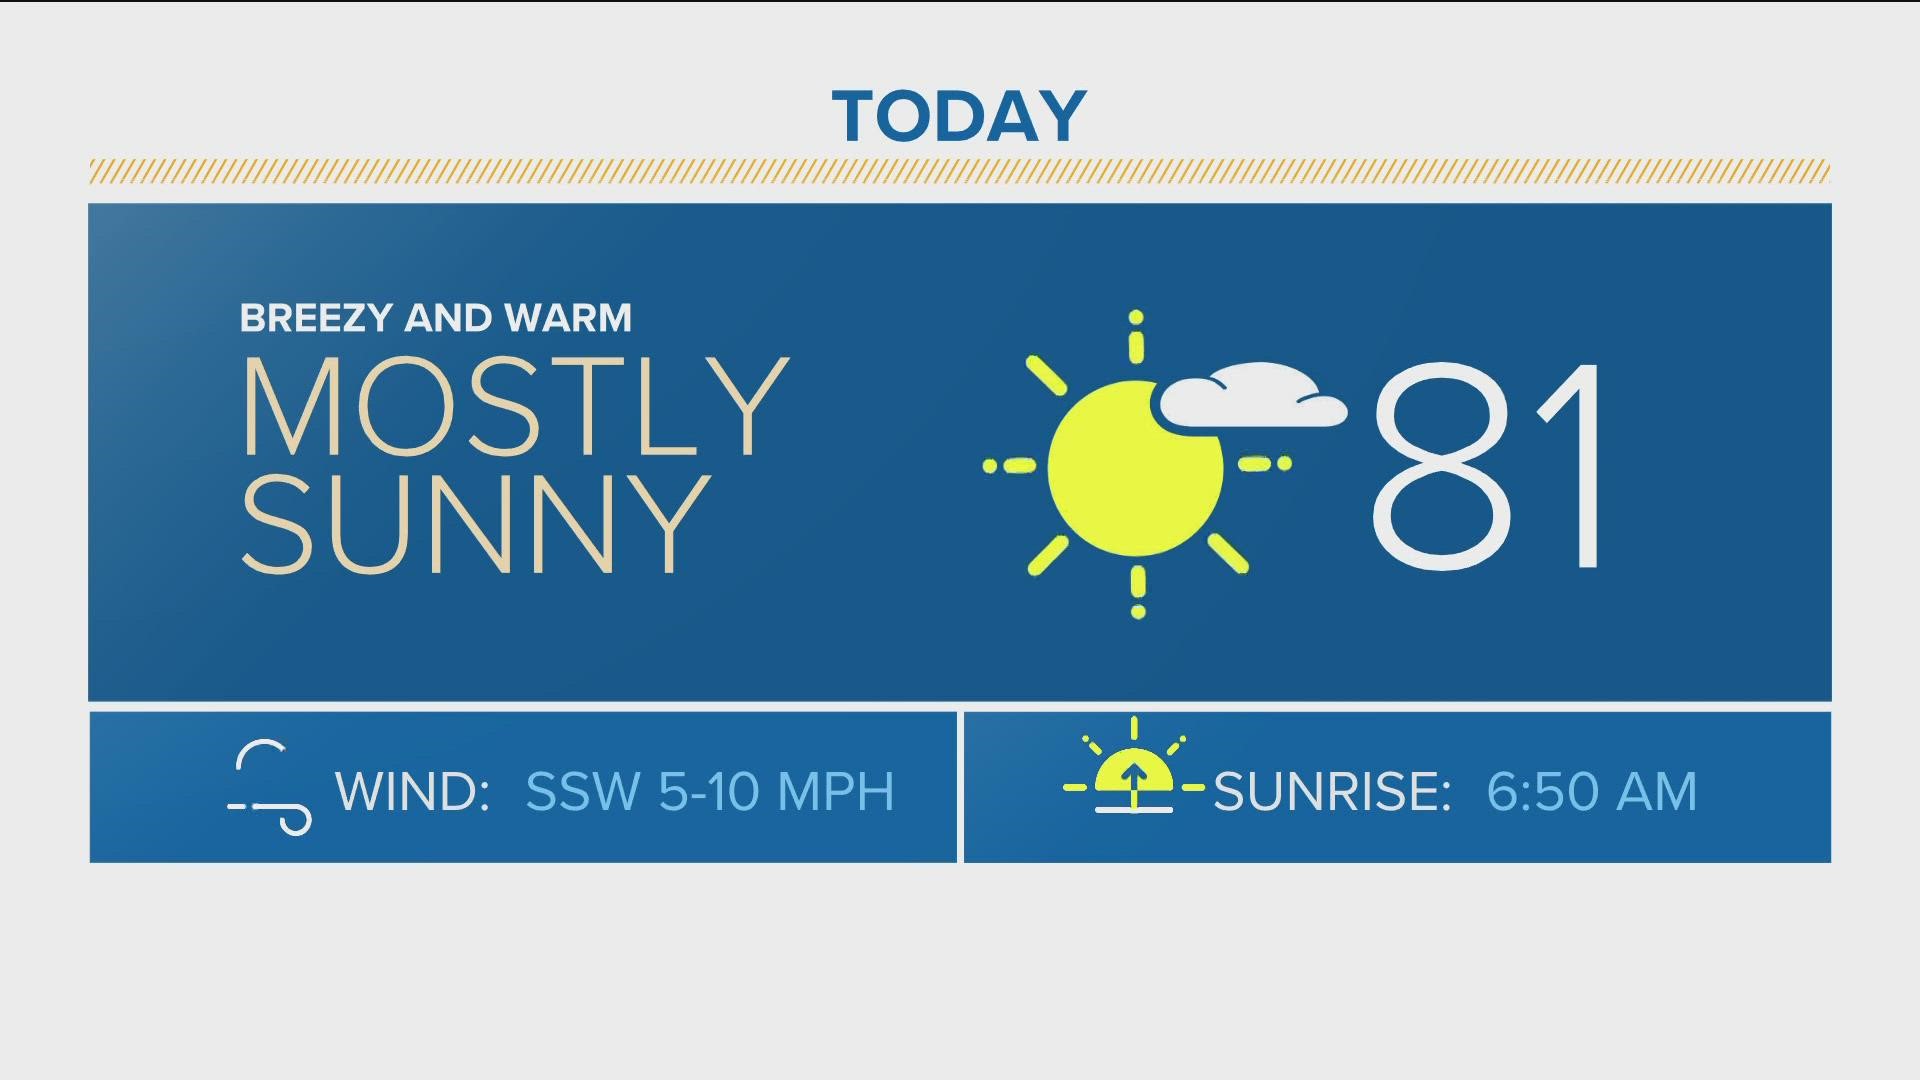 Mostly sunny early, partly cloudy afternoon, isolated foothill storms., high around 81; clear skies overnight, low 51.